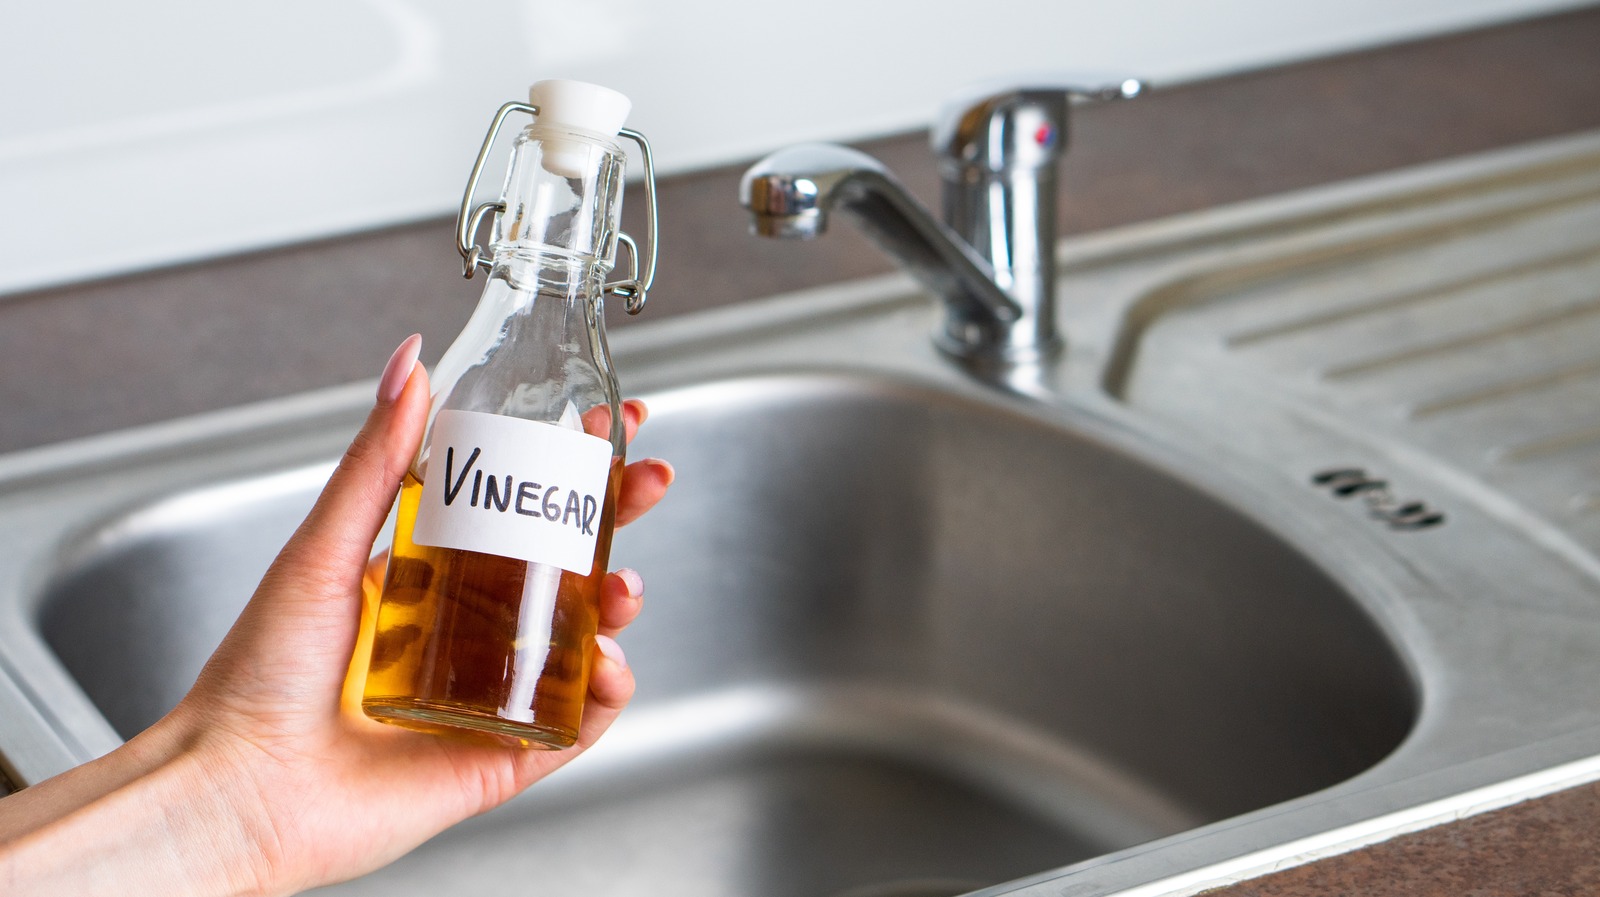 https://www.thedailymeal.com/img/gallery/the-vinegar-hack-that-makes-unclogging-your-kitchen-sink-way-easier/l-intro-1690562527.jpg